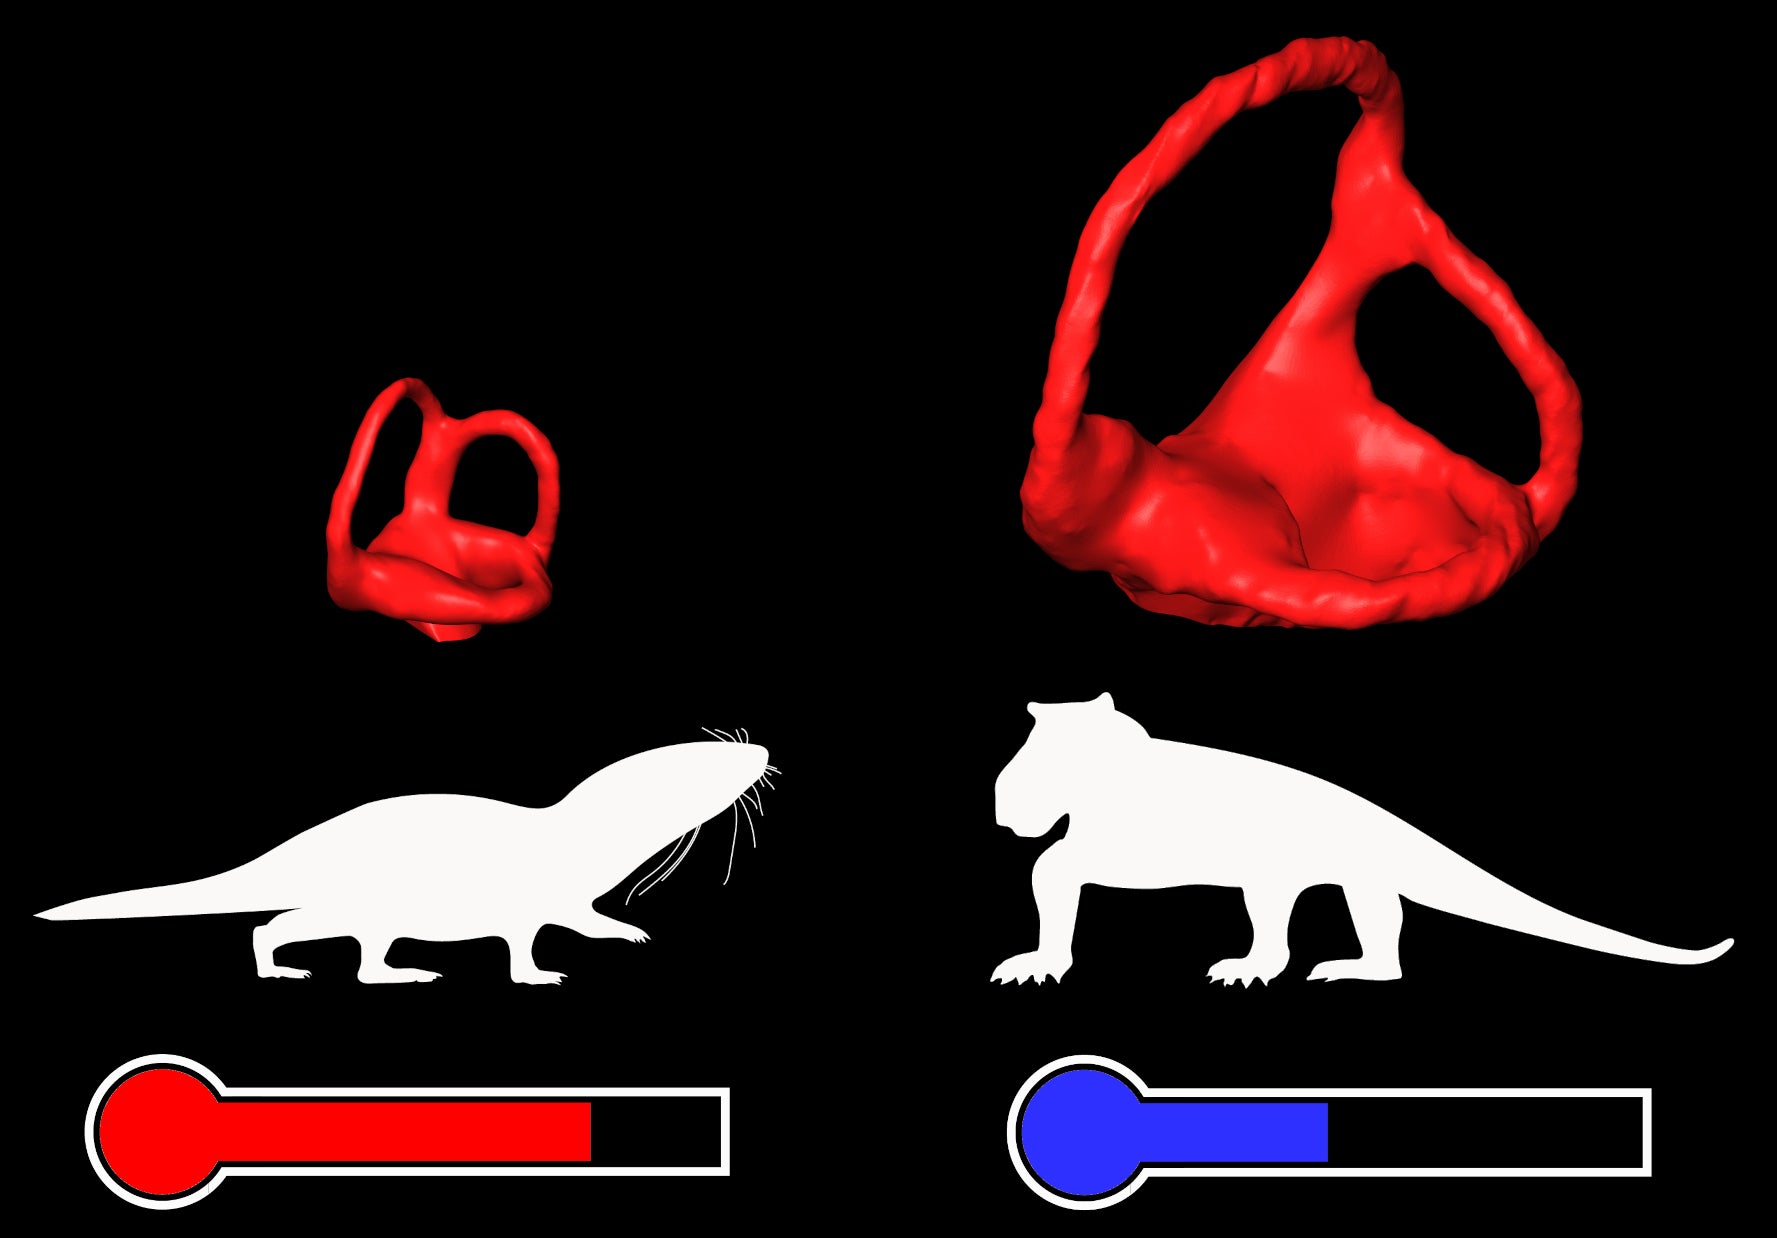 New Evidence Emerges in Mystery of When Mammals Became Warm-Blooded -  Scientific American